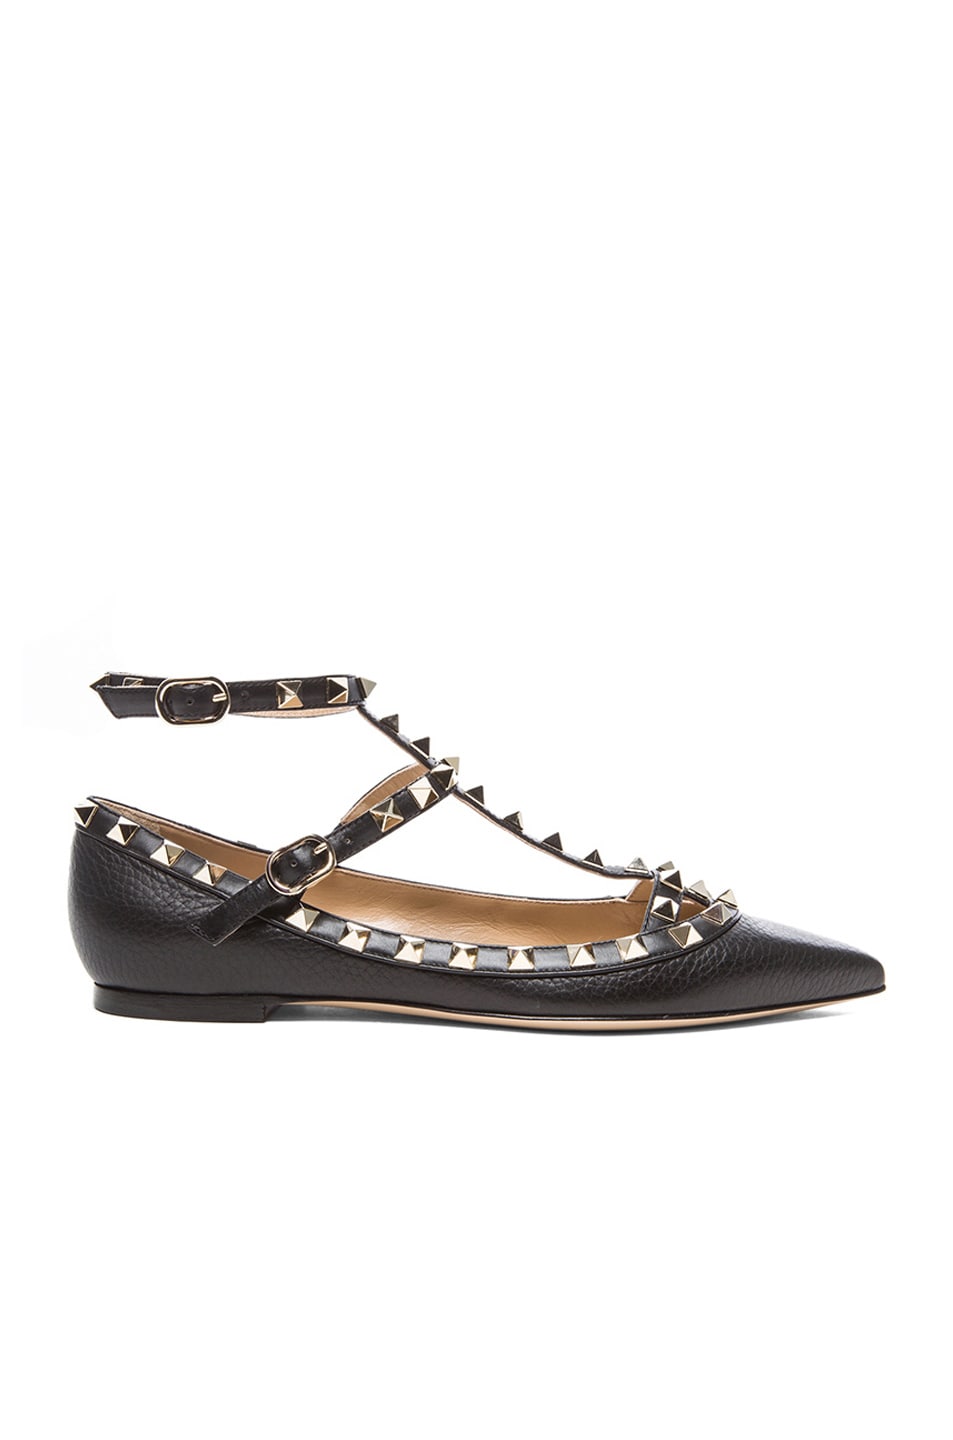 Valentino Rockstud Grained Leather Cage Flats in Black | FWRD